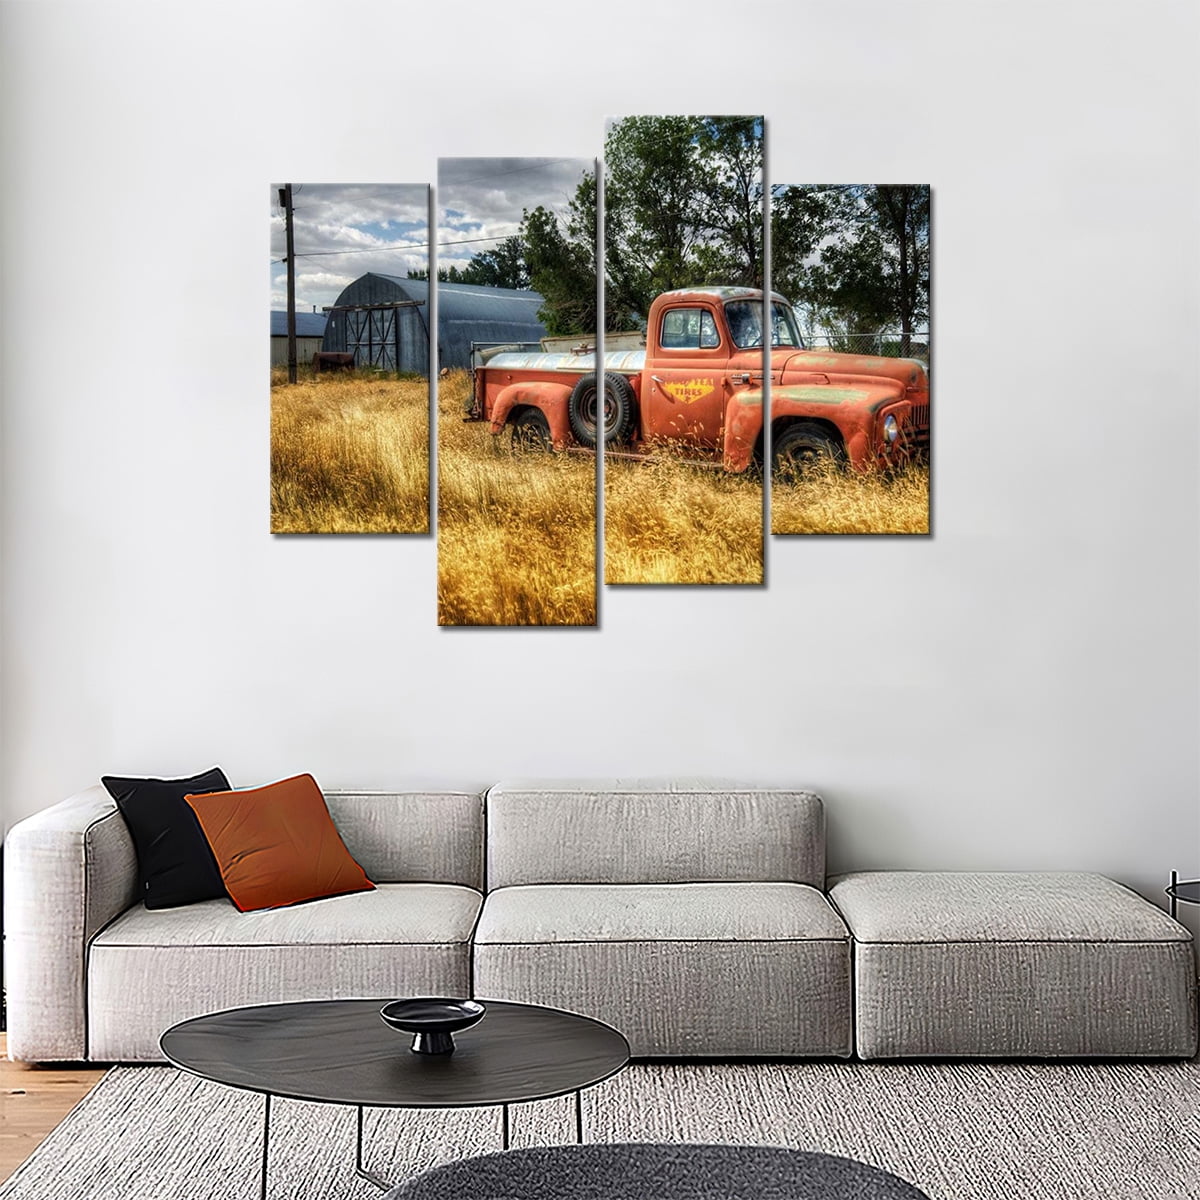 4 Panel Old Truck Wall Art Painting Car Picture Print On Canvas For ...